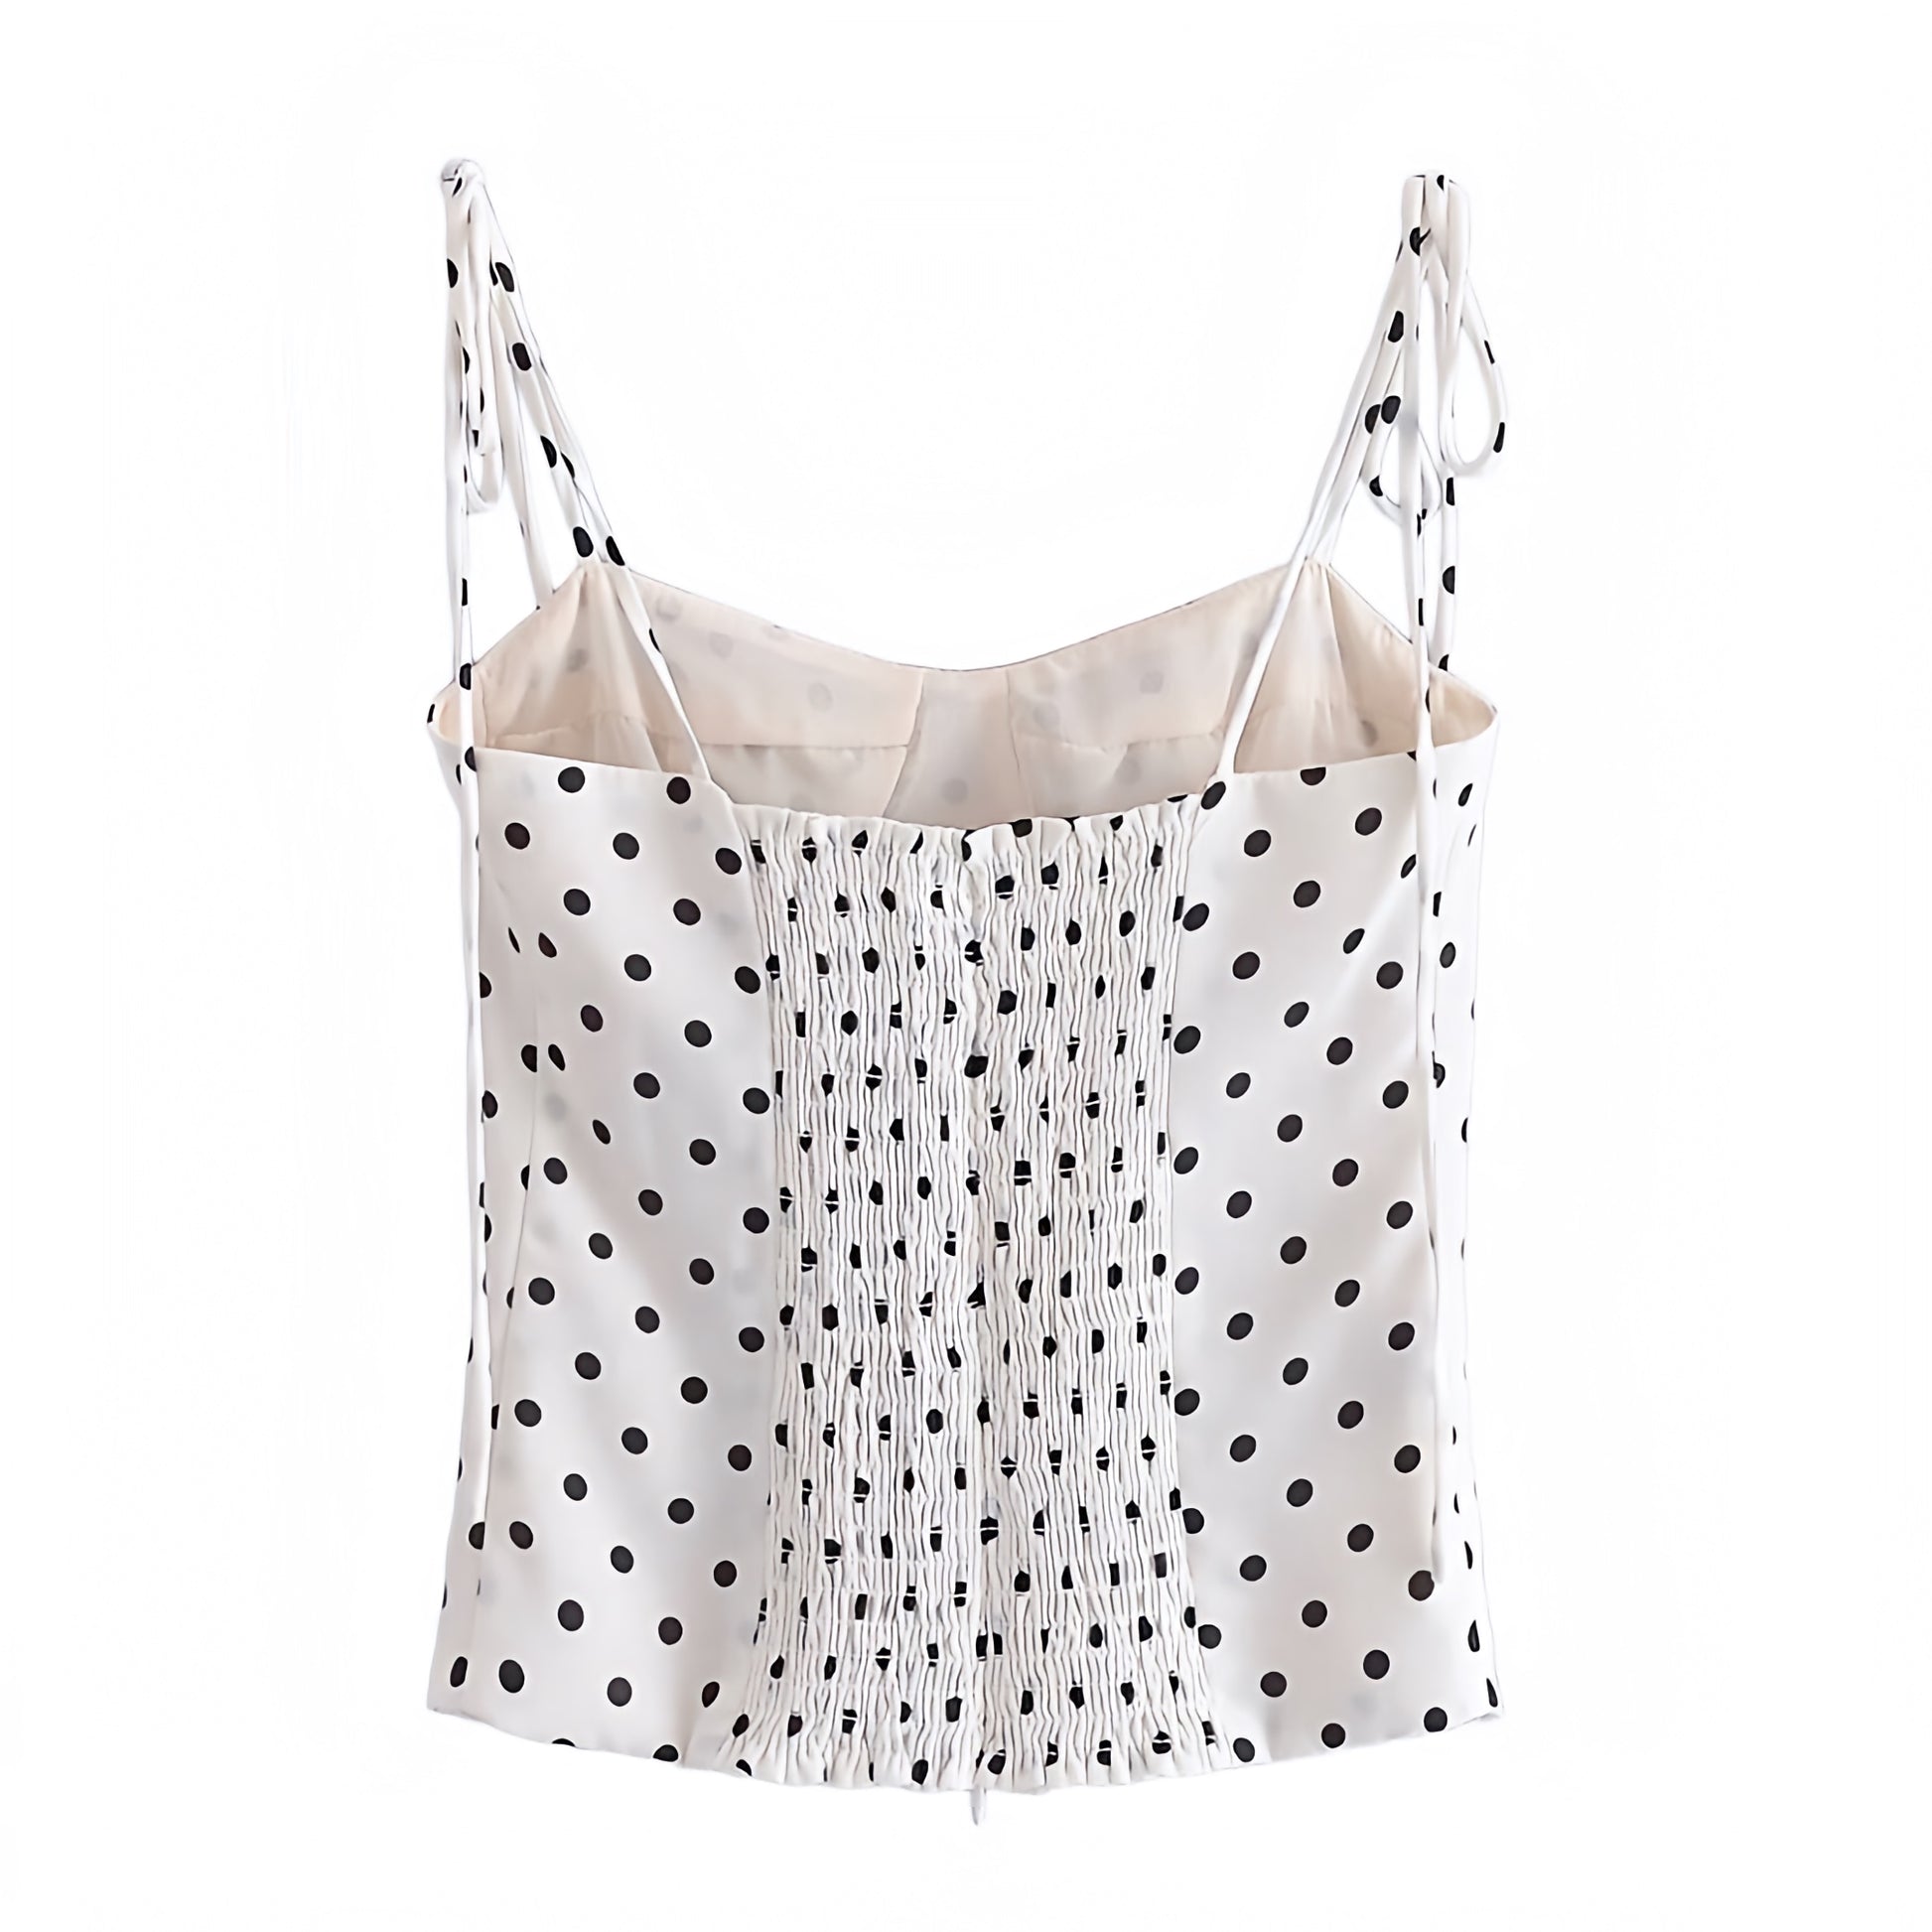 black-and-white-polka-dot-print-patterned-contrast-slim-fit-corset-bustier-bodycon-round-neck-spaghetti-strap-sleeveless-backless-open-back-camisole-crop-tank-top-blouse-spring-2024-summer-chic-trendy-women-ladies-elegant-casual-classy-feminine-semi-formal-preppy-style-european-beach-wear-zara-revolve-princess-polly-altard-state-edikted-urban-outfitters-brandy-melville